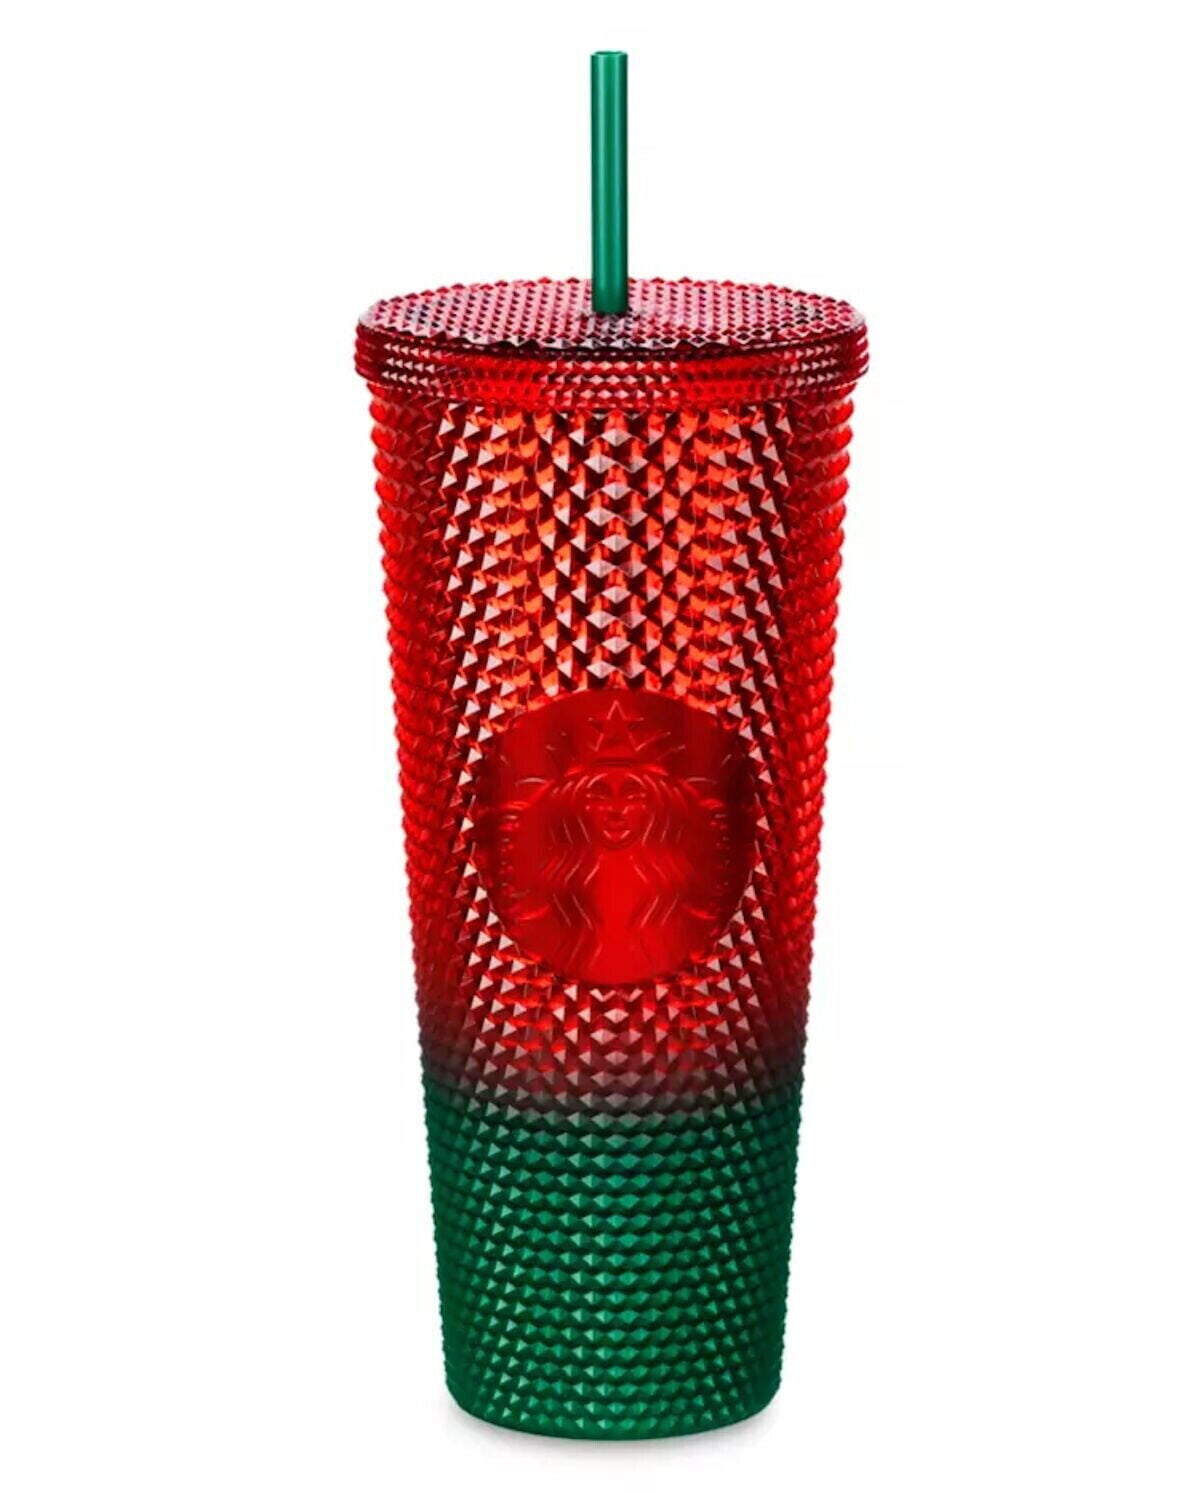 USF Dining - It's Red Cup Day at Pinnacle Starbucks!